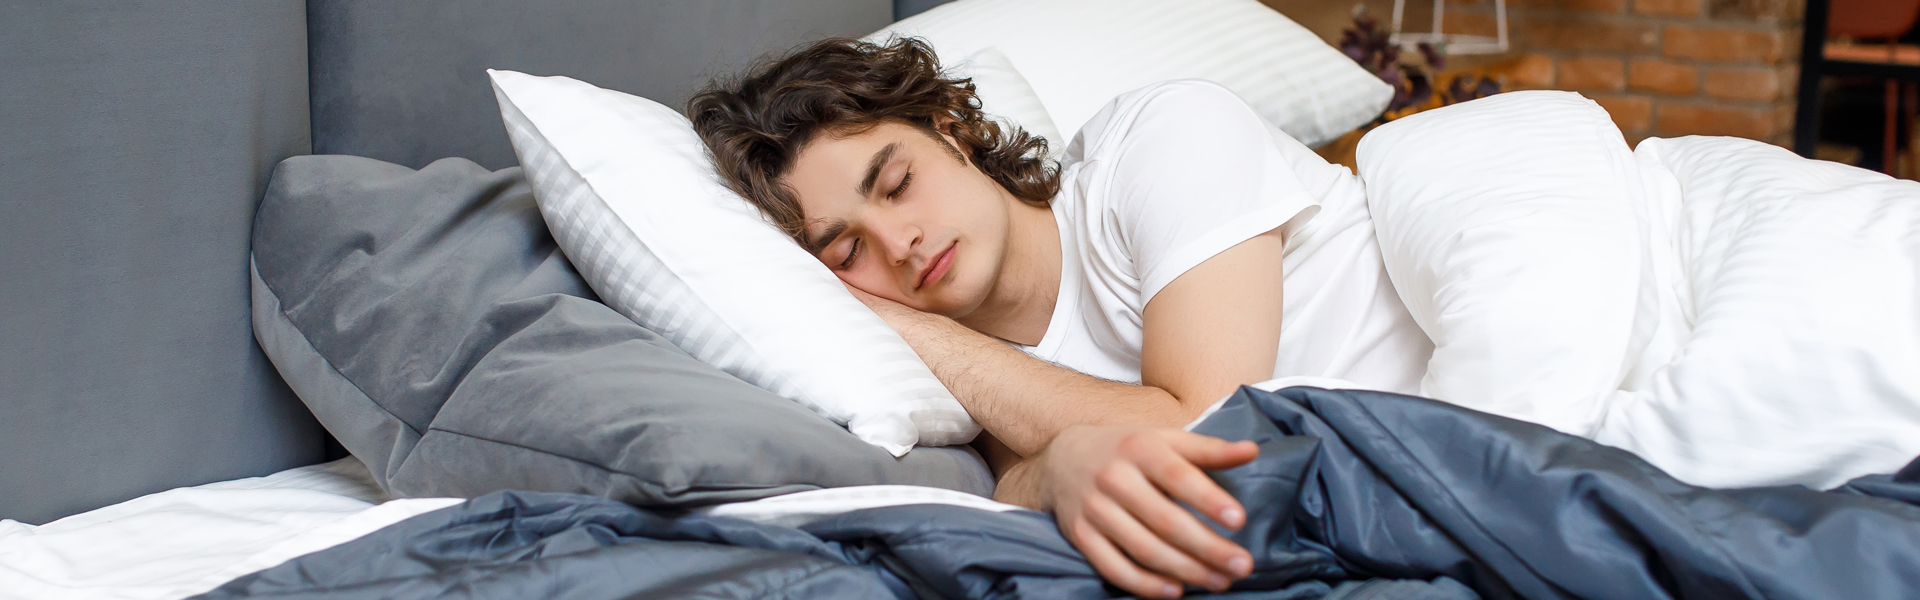 Sleep Apnea Unveiled: The Silent Nighttime Epidemic You Need to Know About!